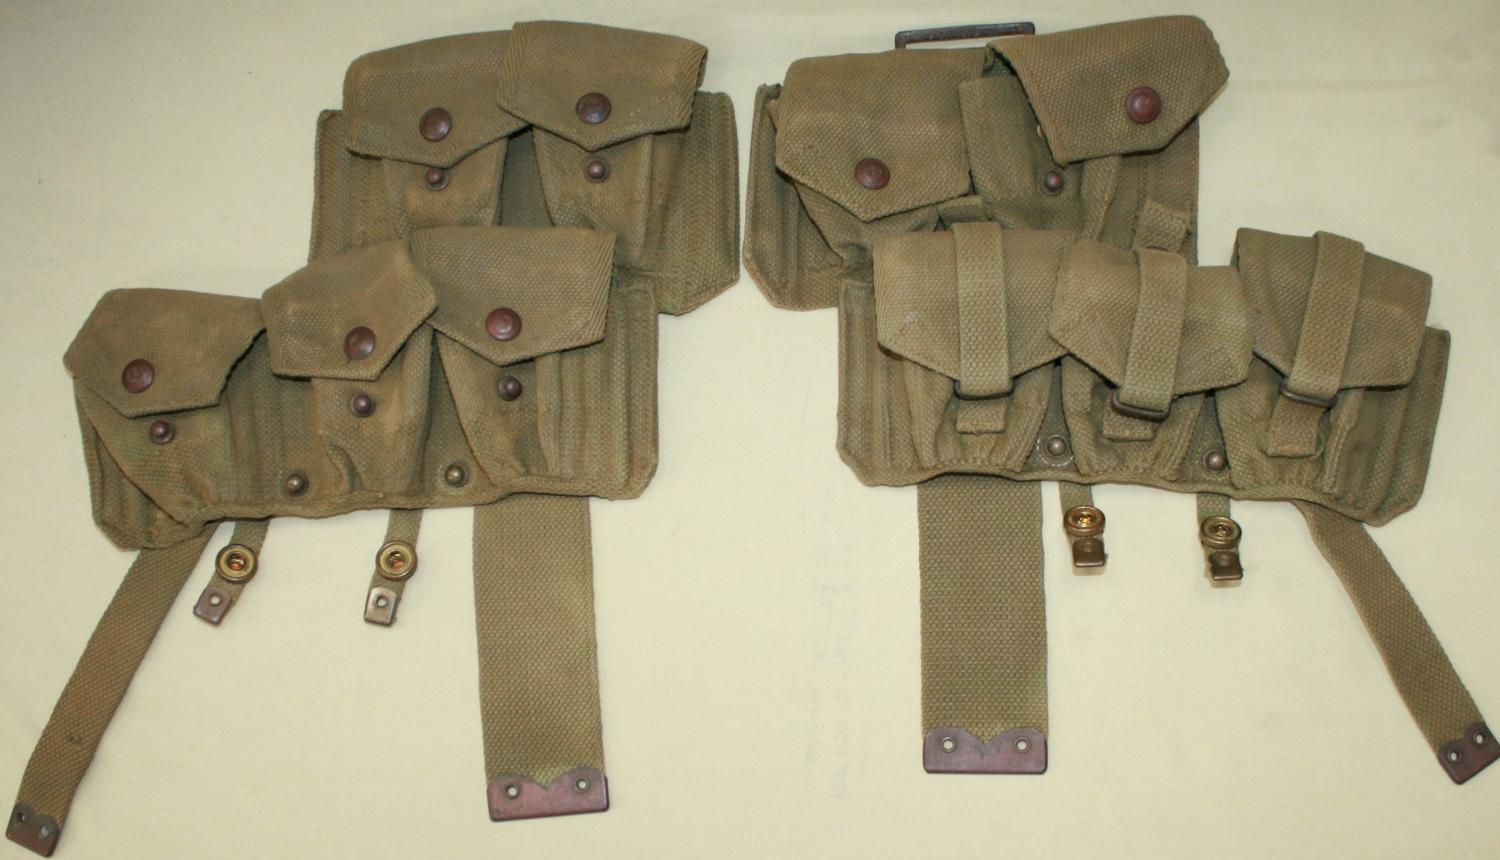 A RARE WWII PAIR OF 08 AMMO POUCHES